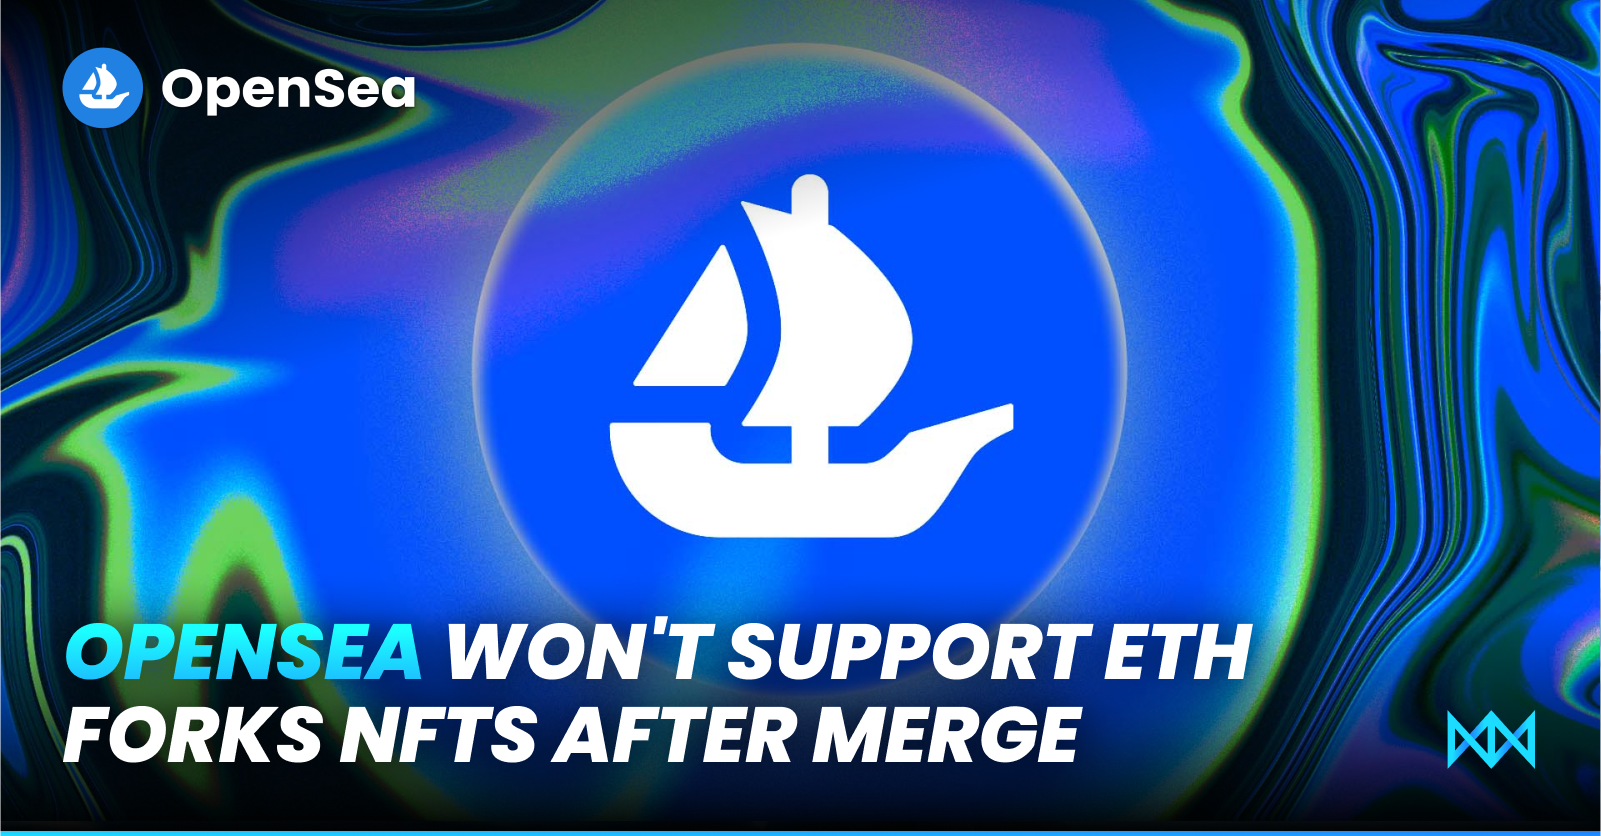 OpenSea Will Not Support Ethereum Forks NFTs After The Merge